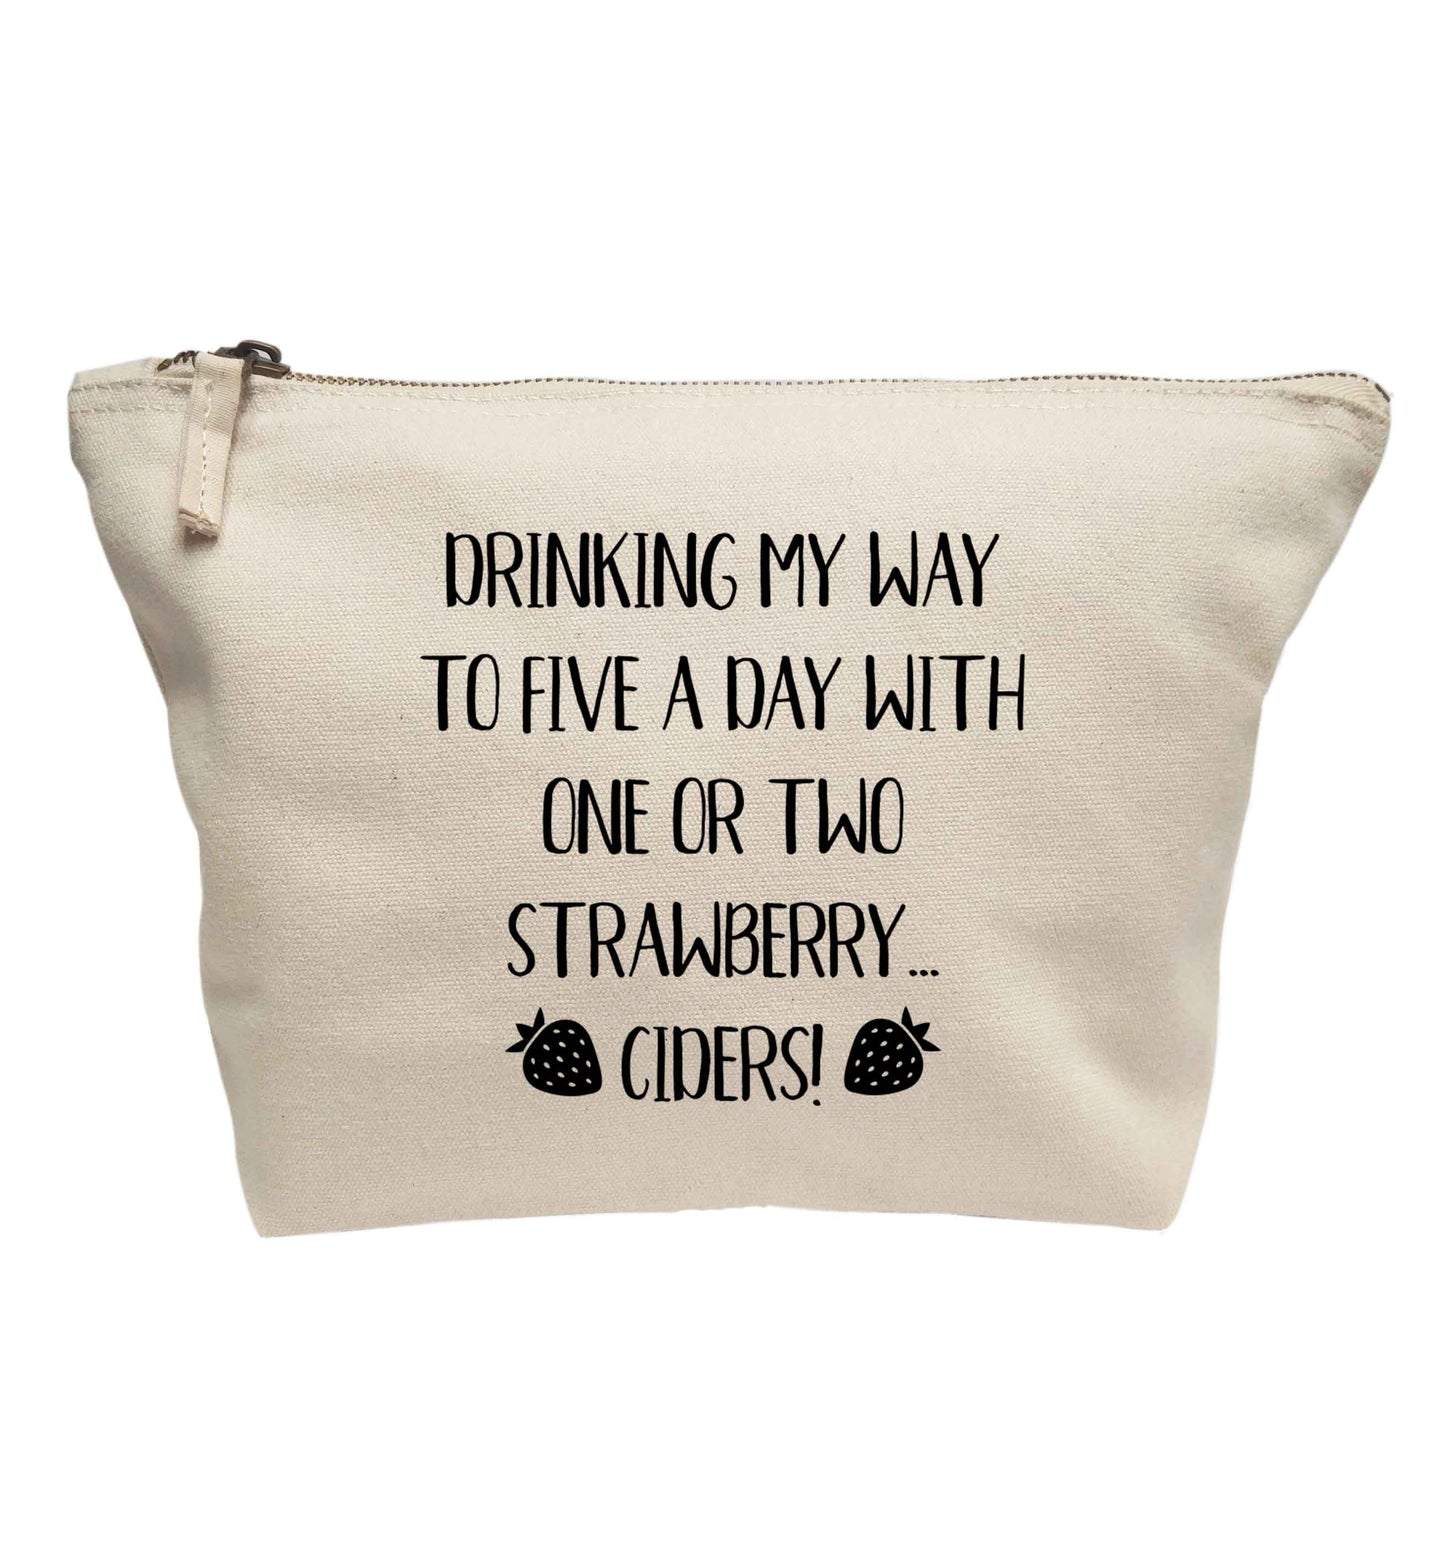 Drinking my way to five a day with one or two strawberry ciders | makeup / wash bag